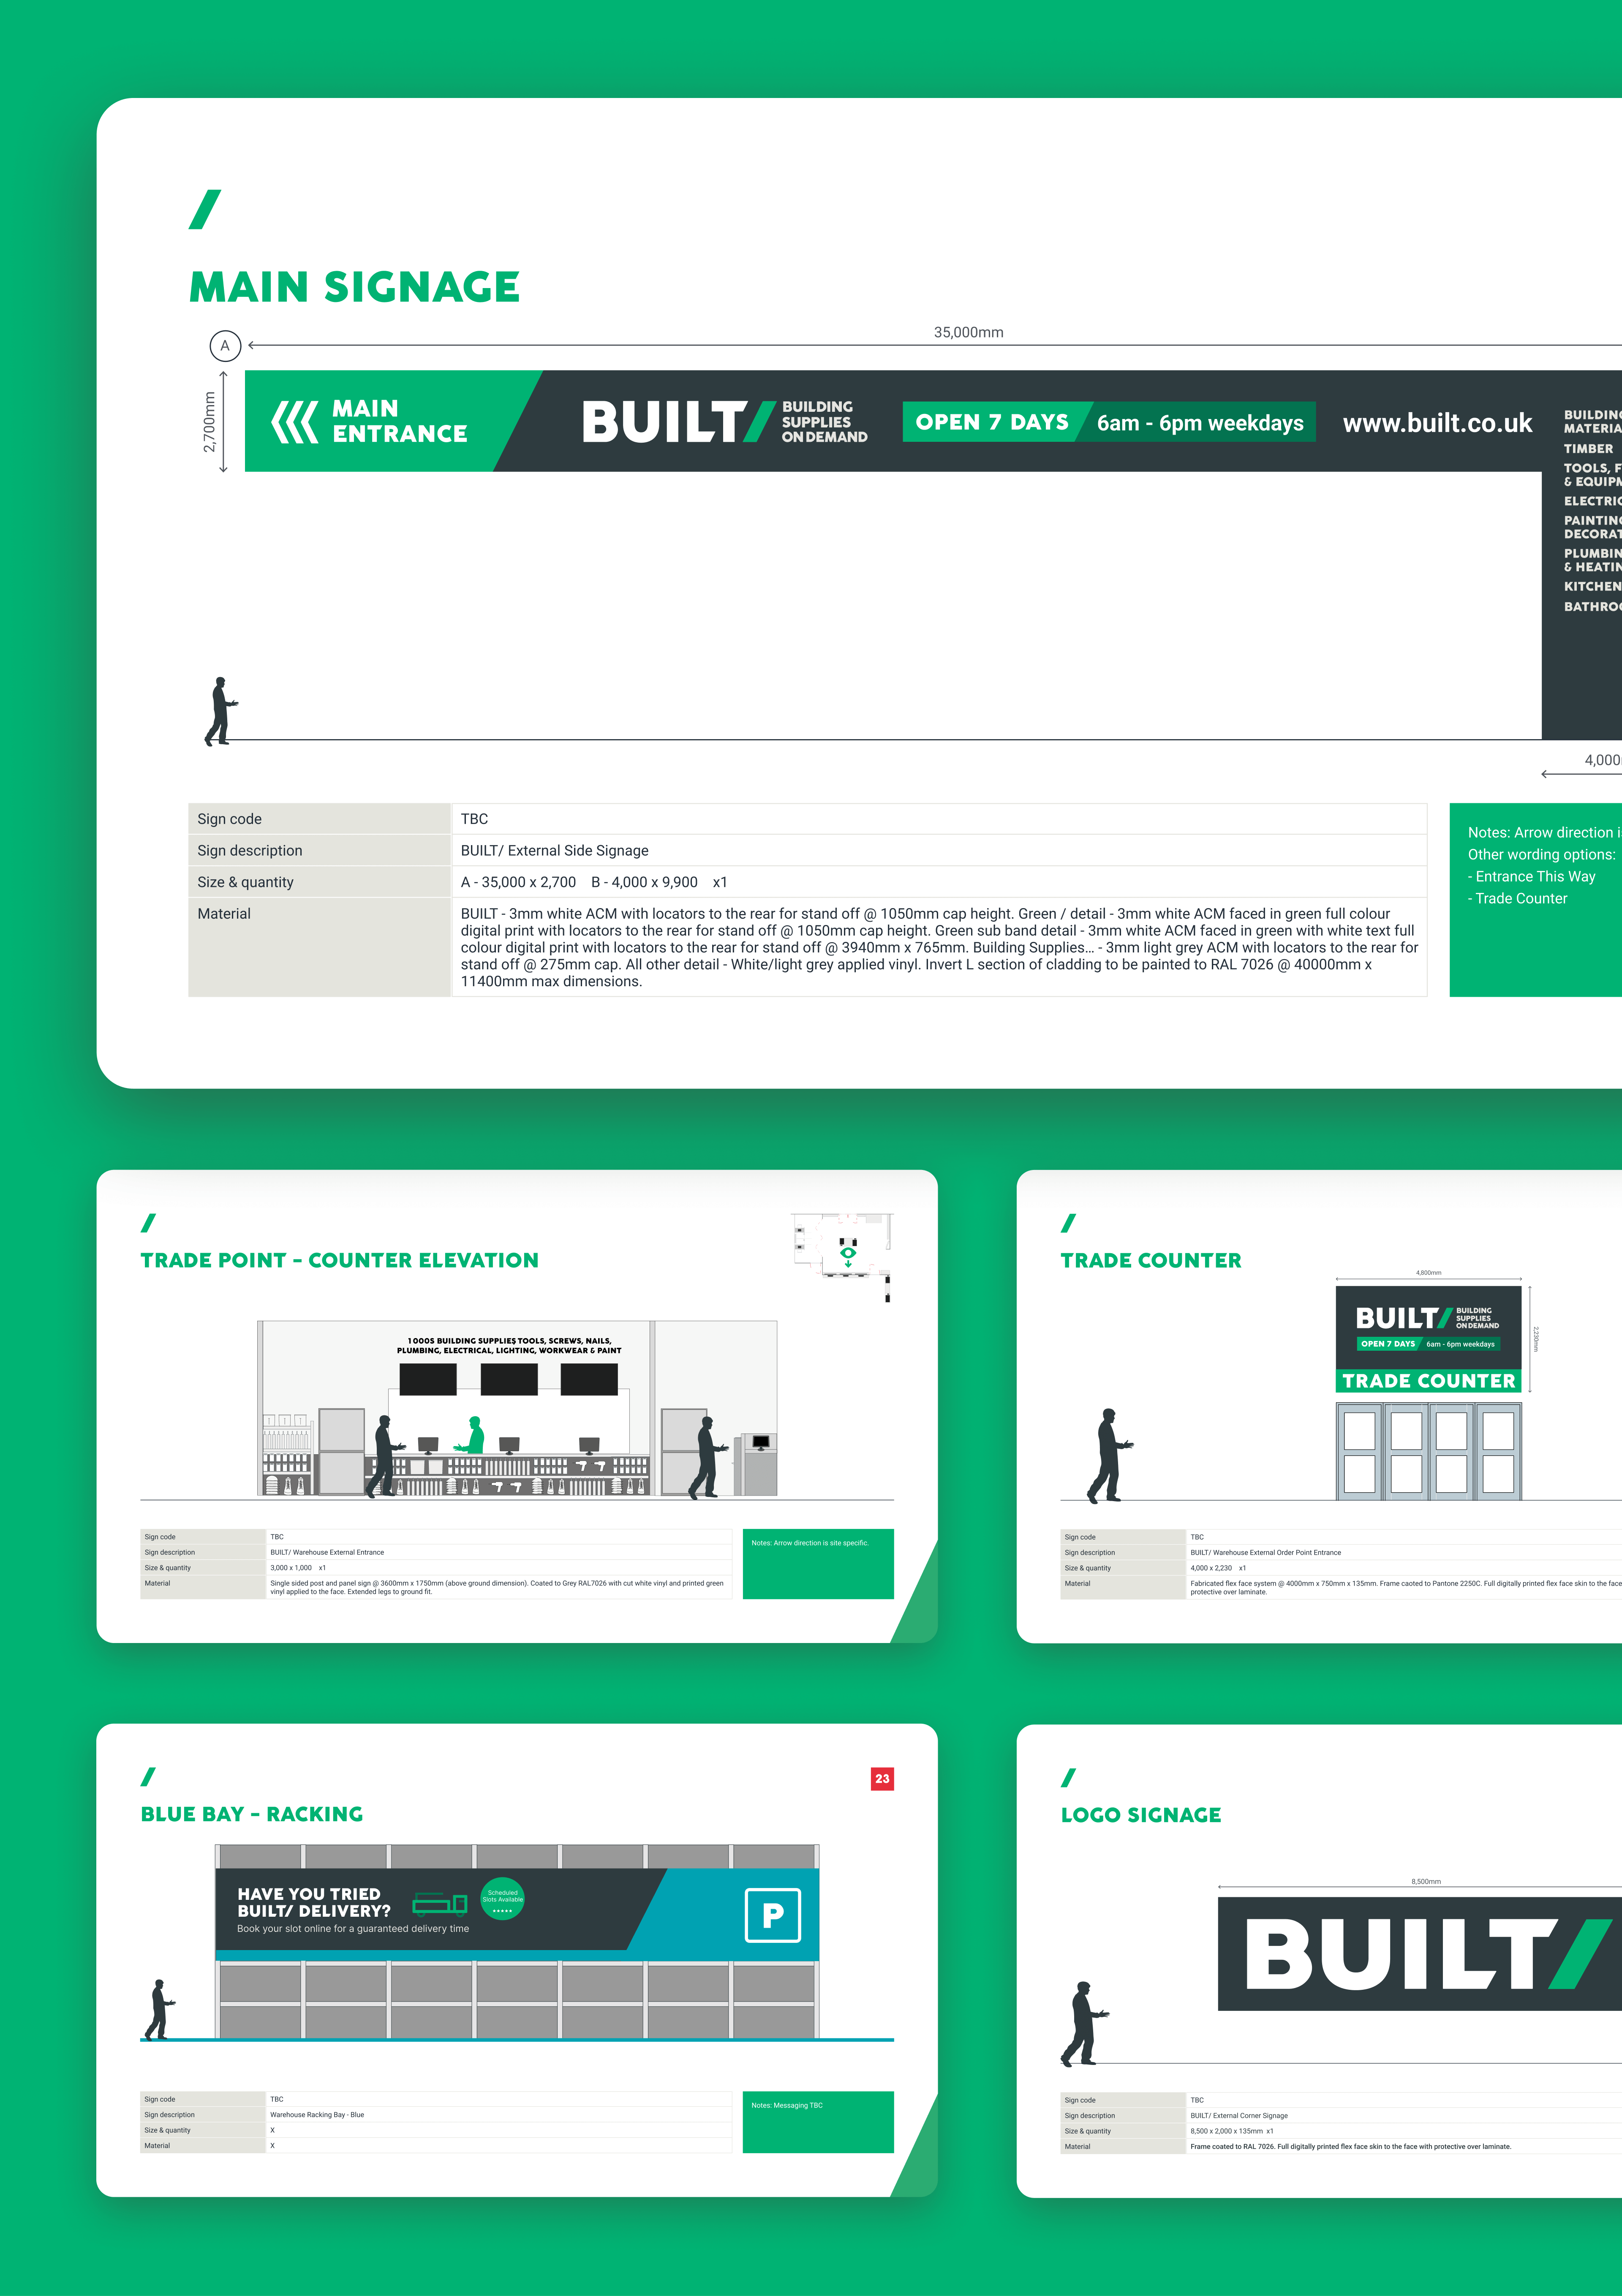 An image showing four pages from the Built brand guidelines showing how signage should be displayed on buildings and trade counters